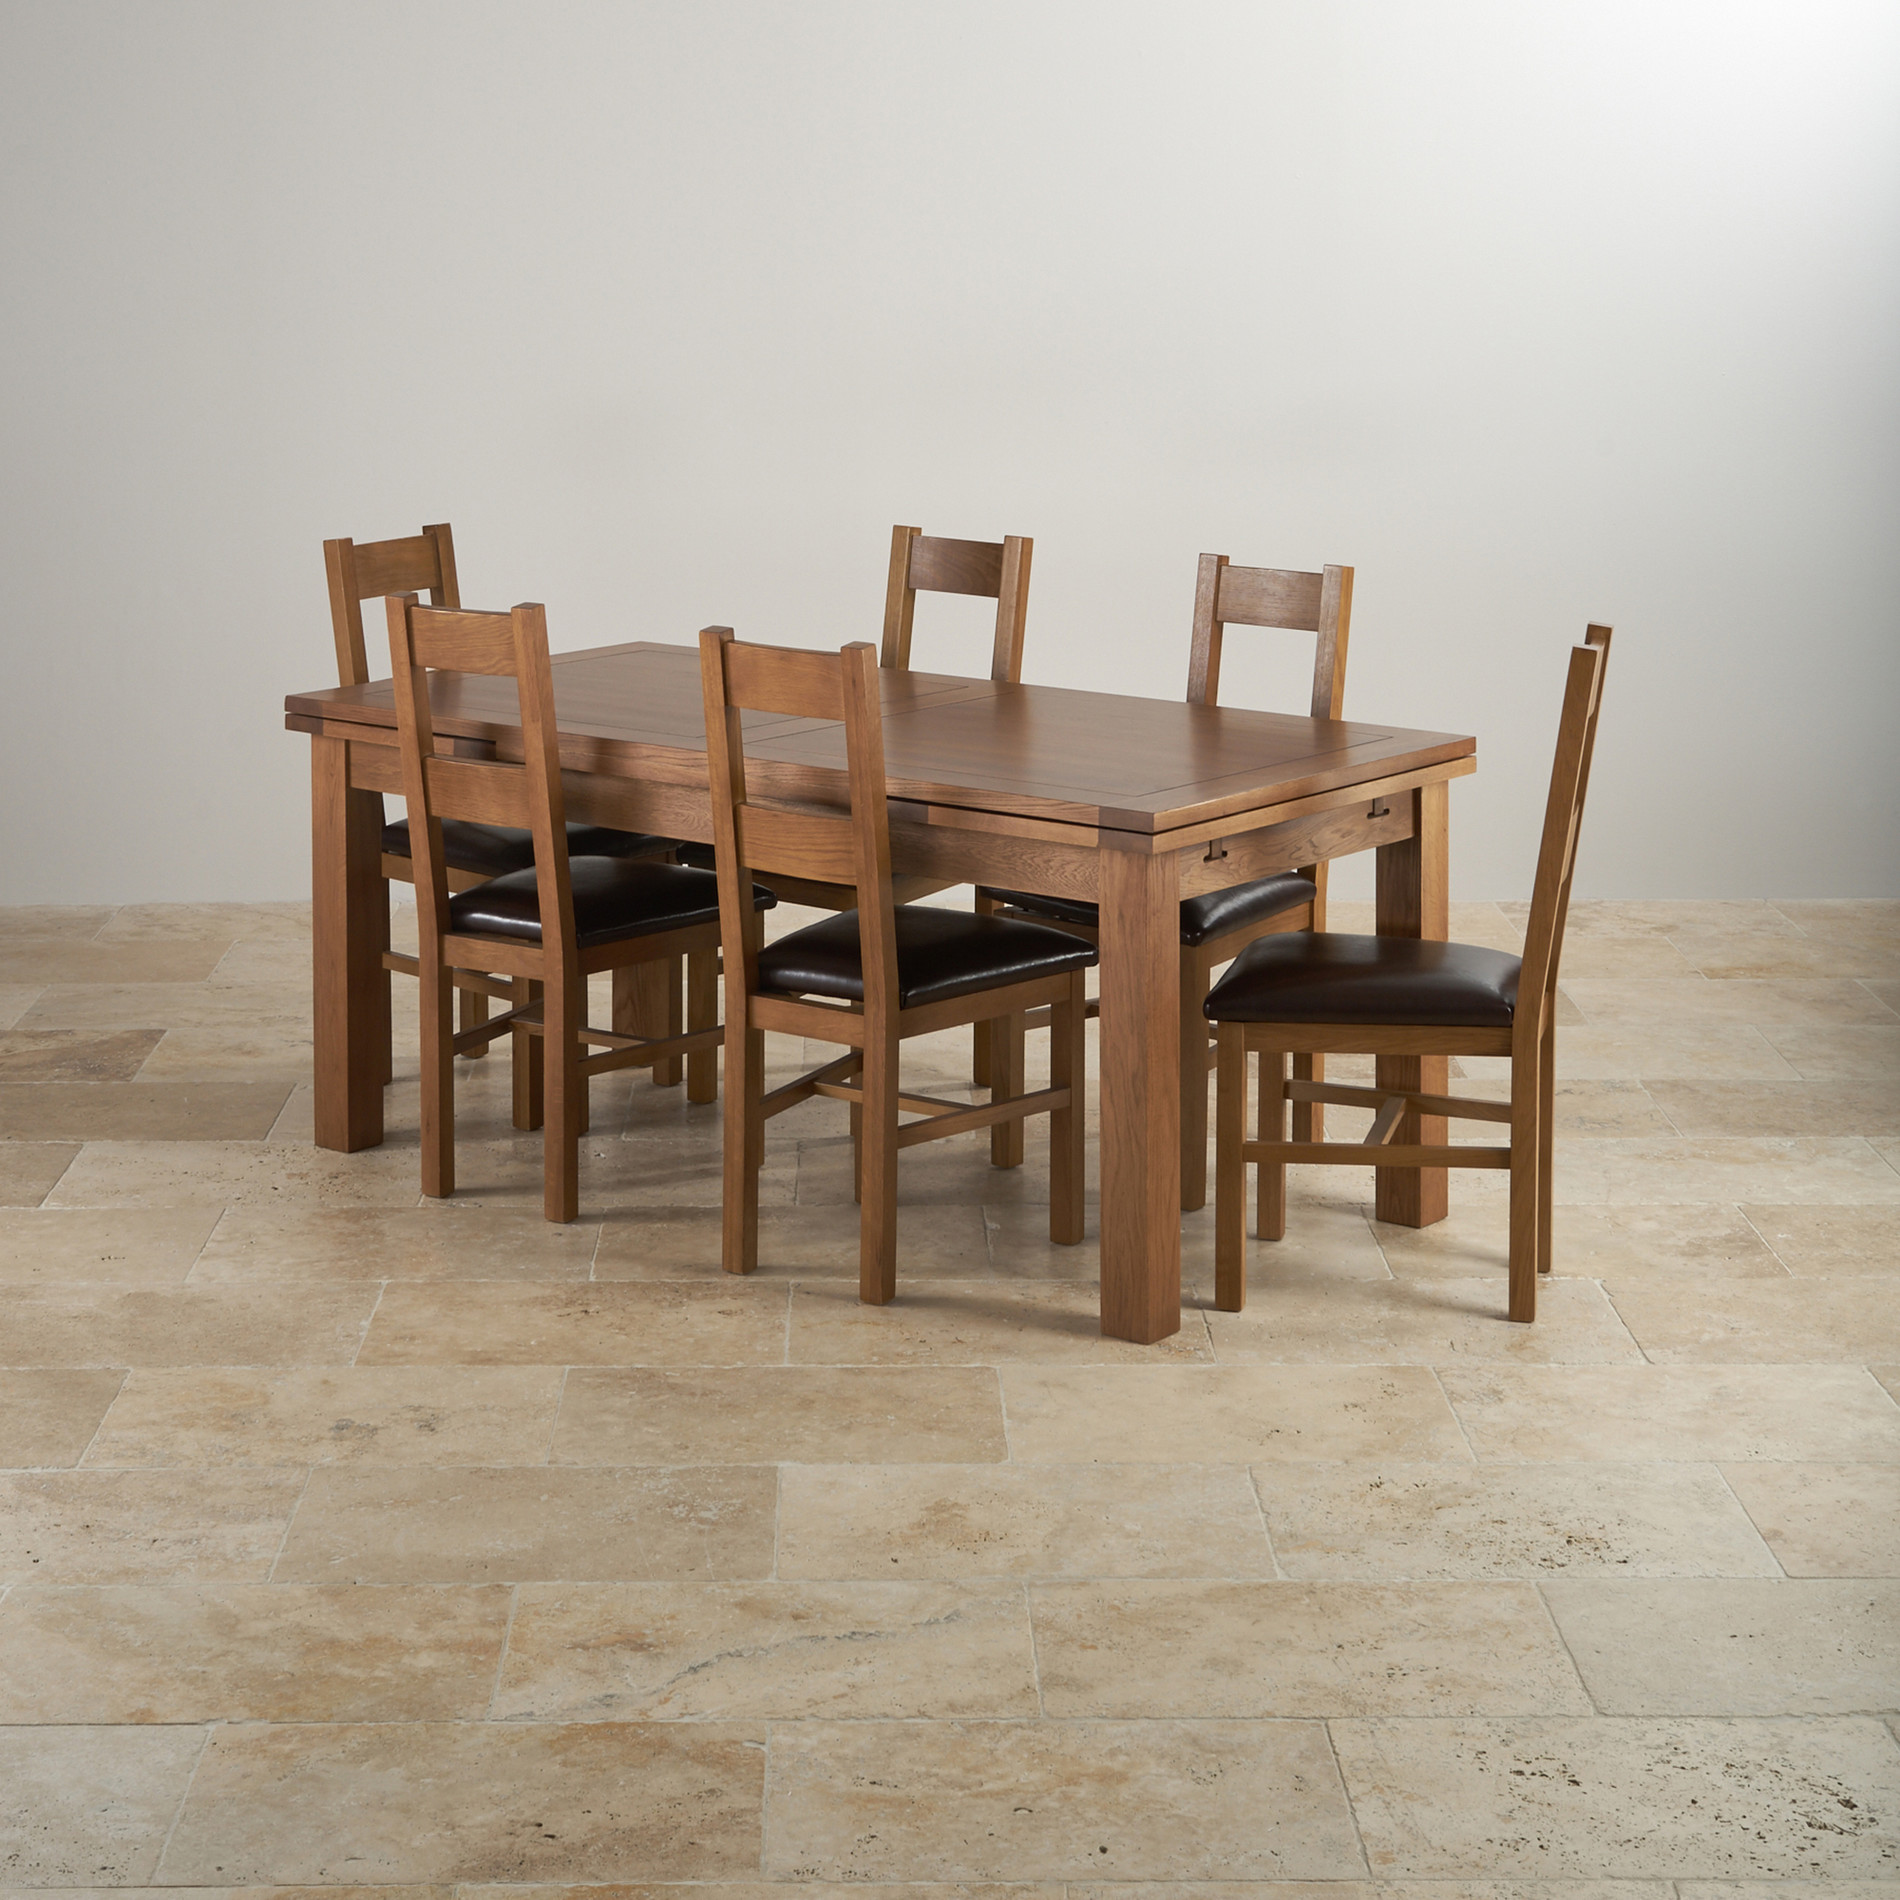 Rustic Oak Dining Set - 6ft Table with 6 Chairs